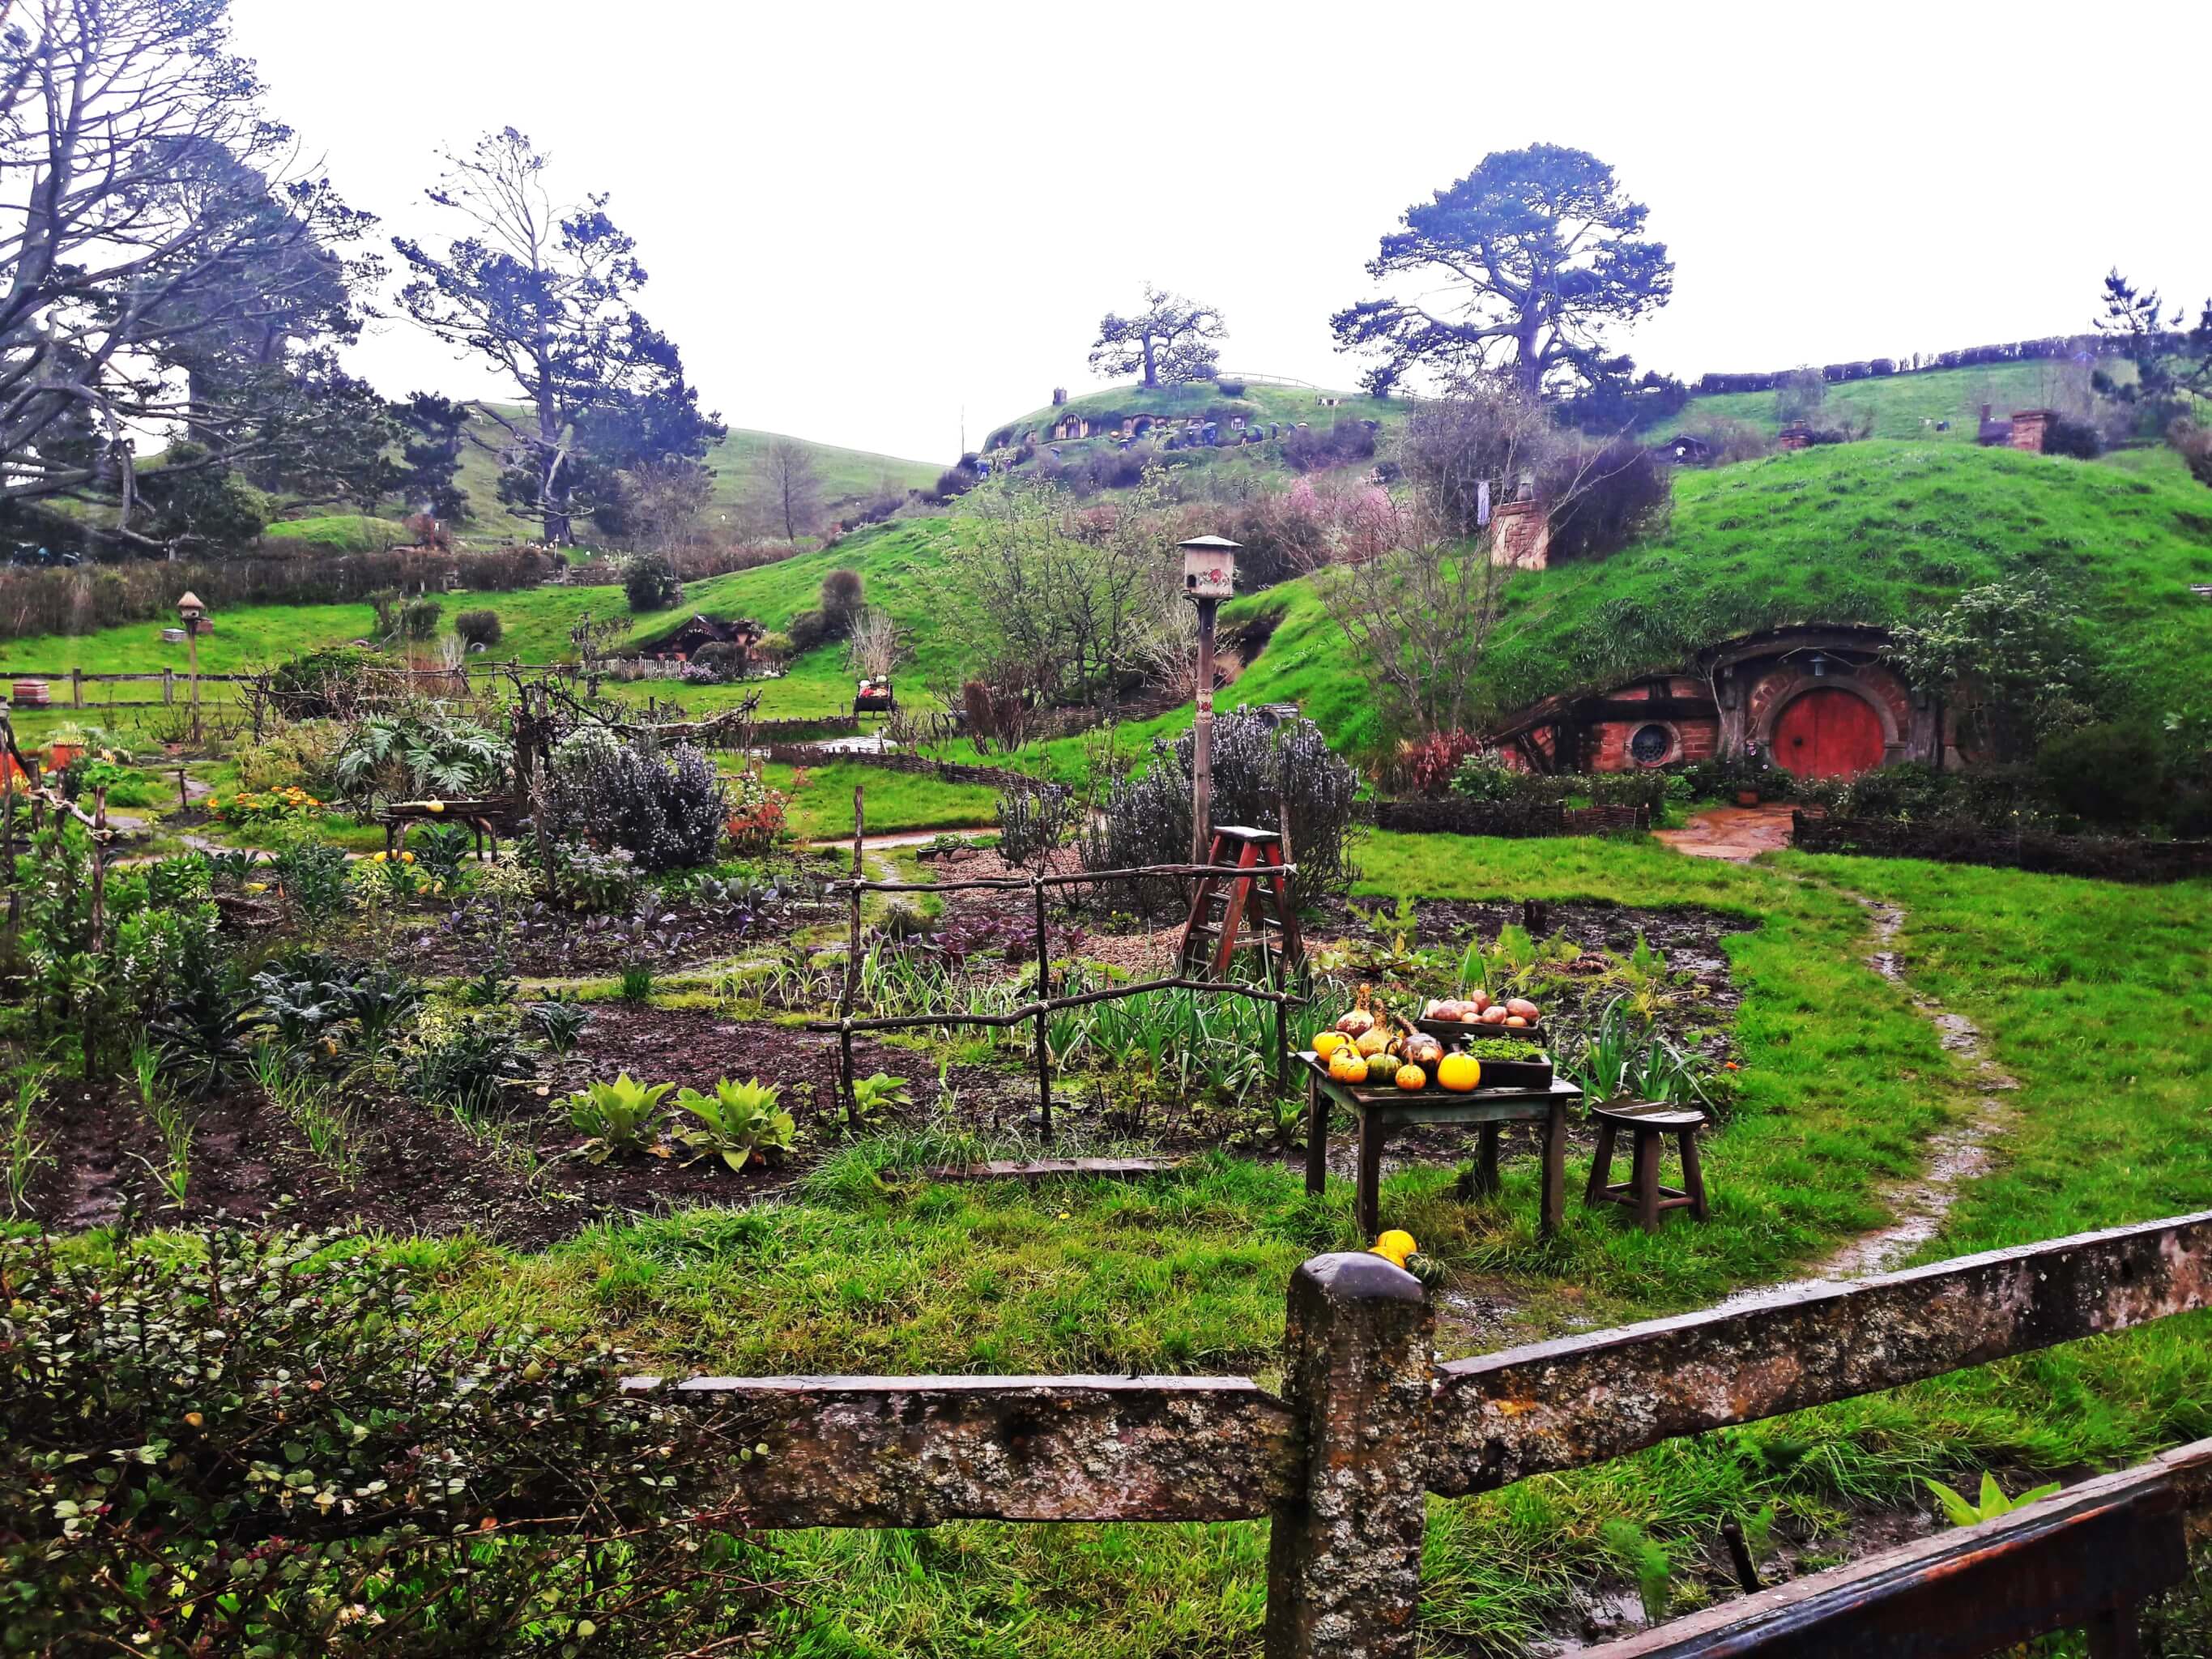 Cold, dark, gloomy and wet conditions on visiting Hobbiton